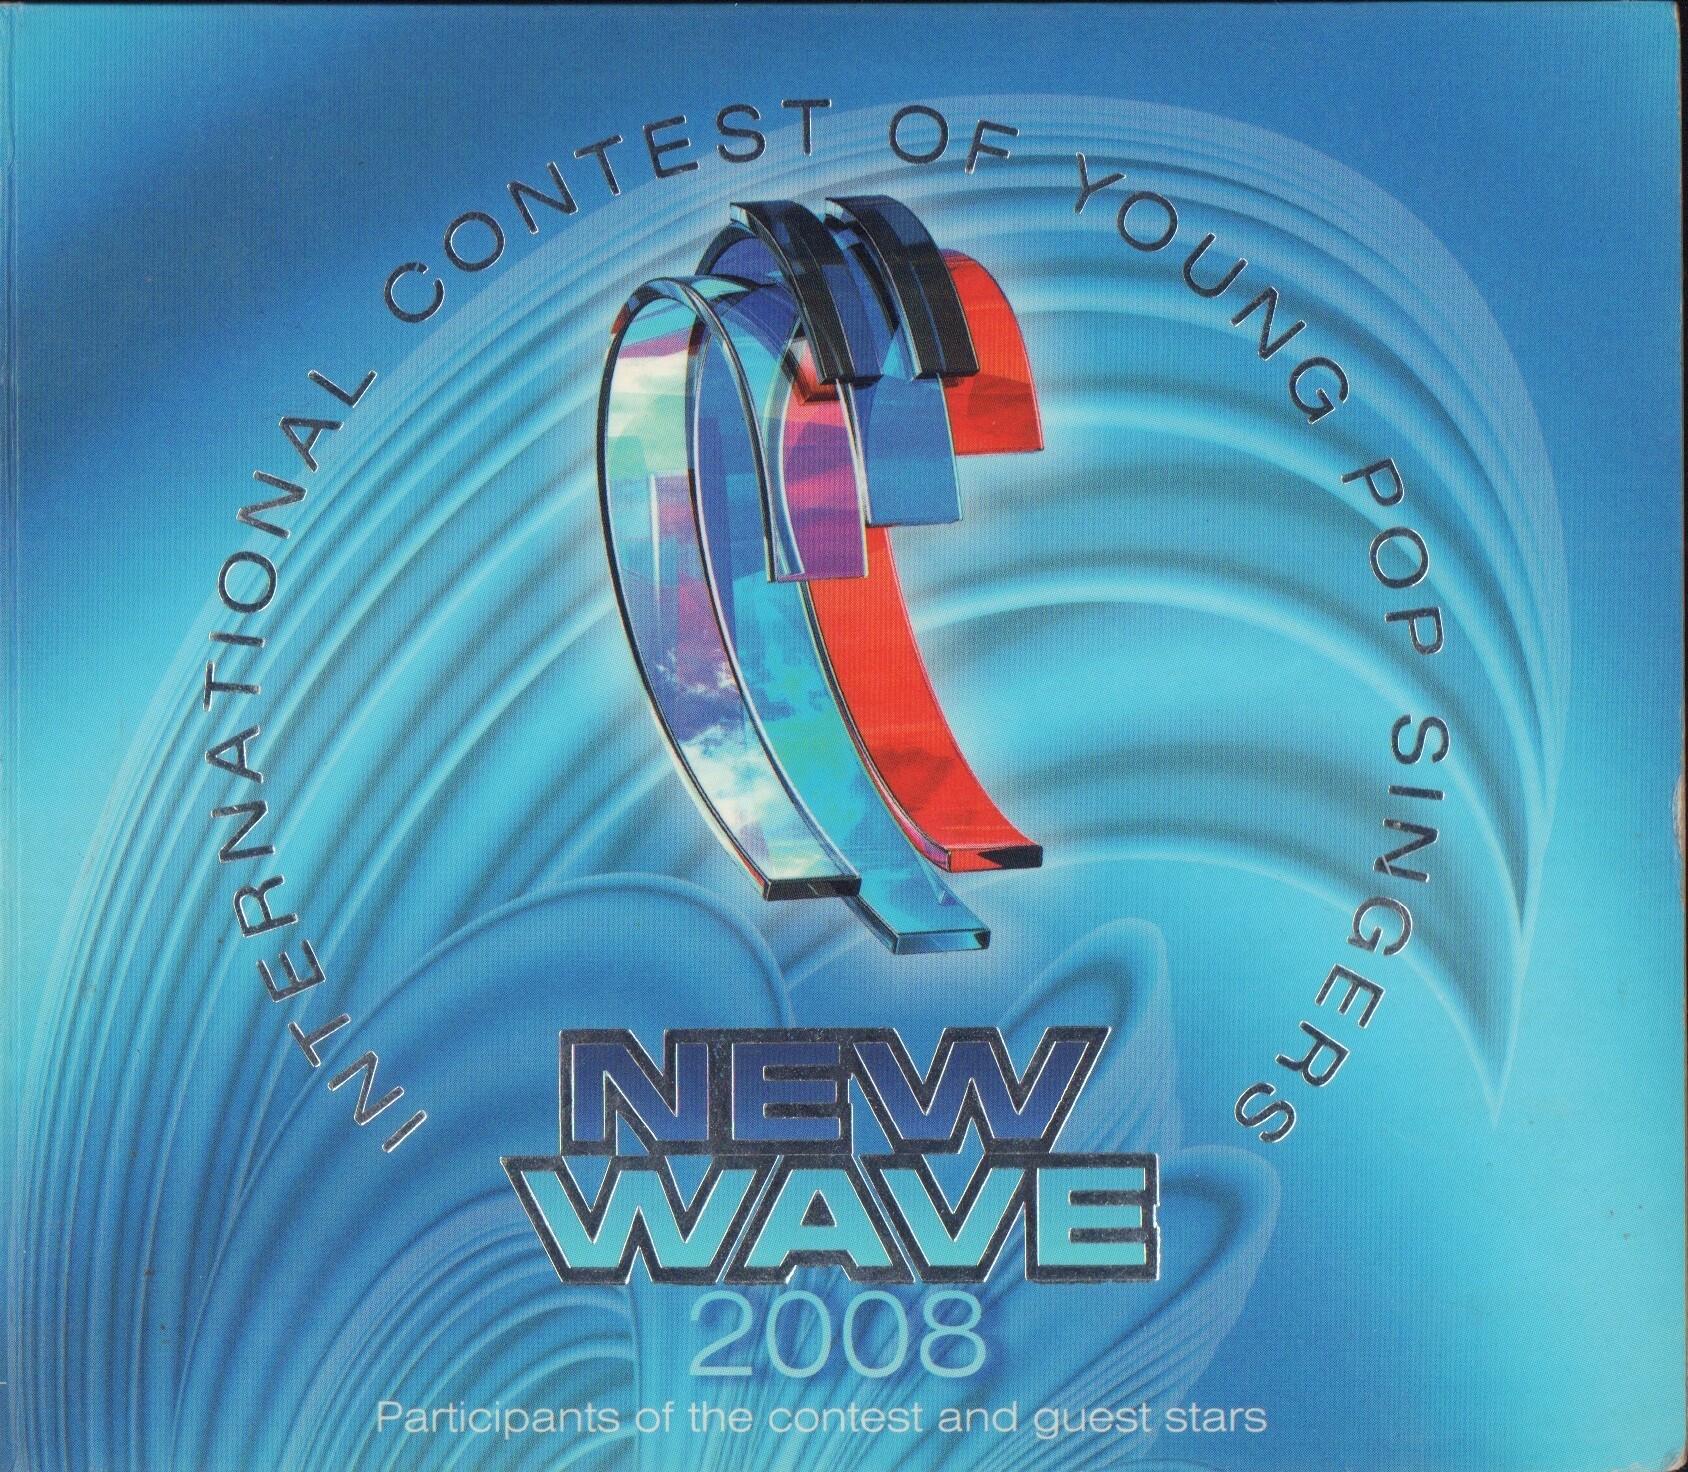 New Wave 2008. Participants of the contest and guest stars